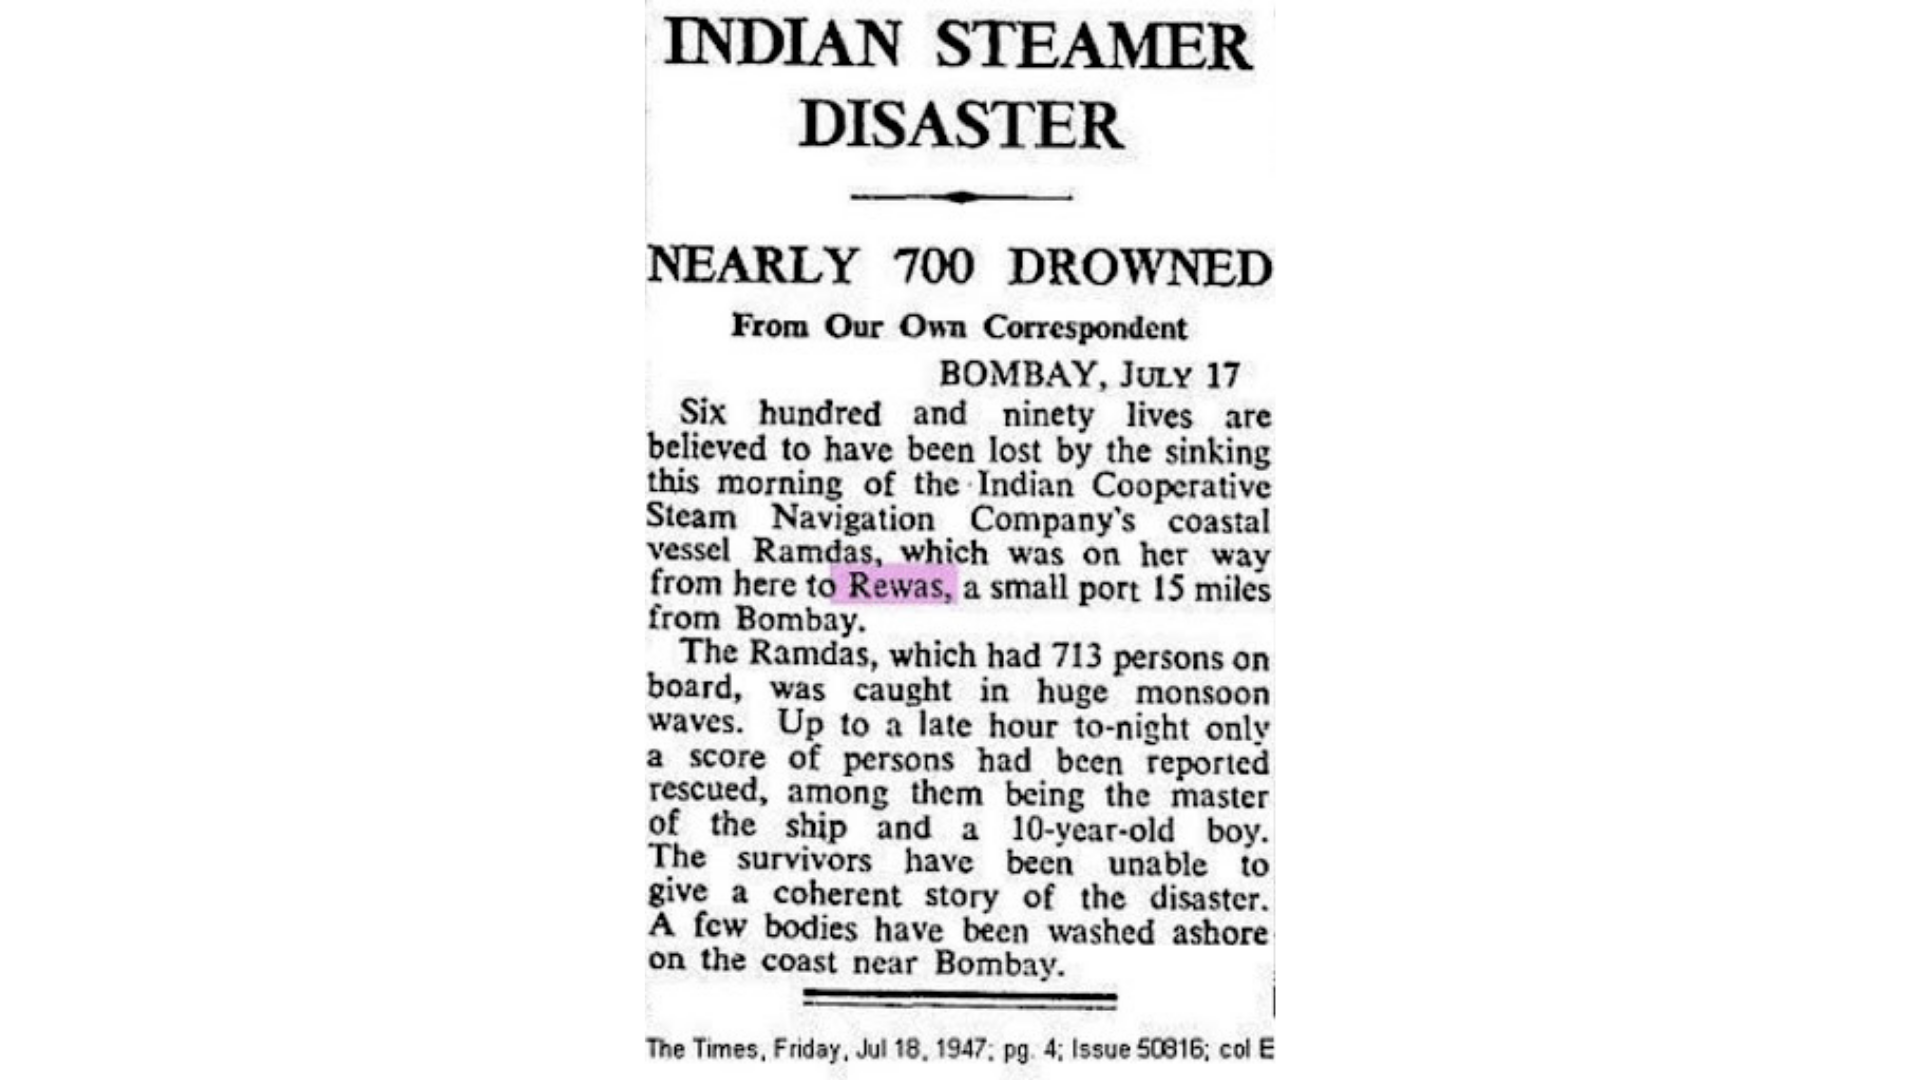 Newspaper clipping of the disaster